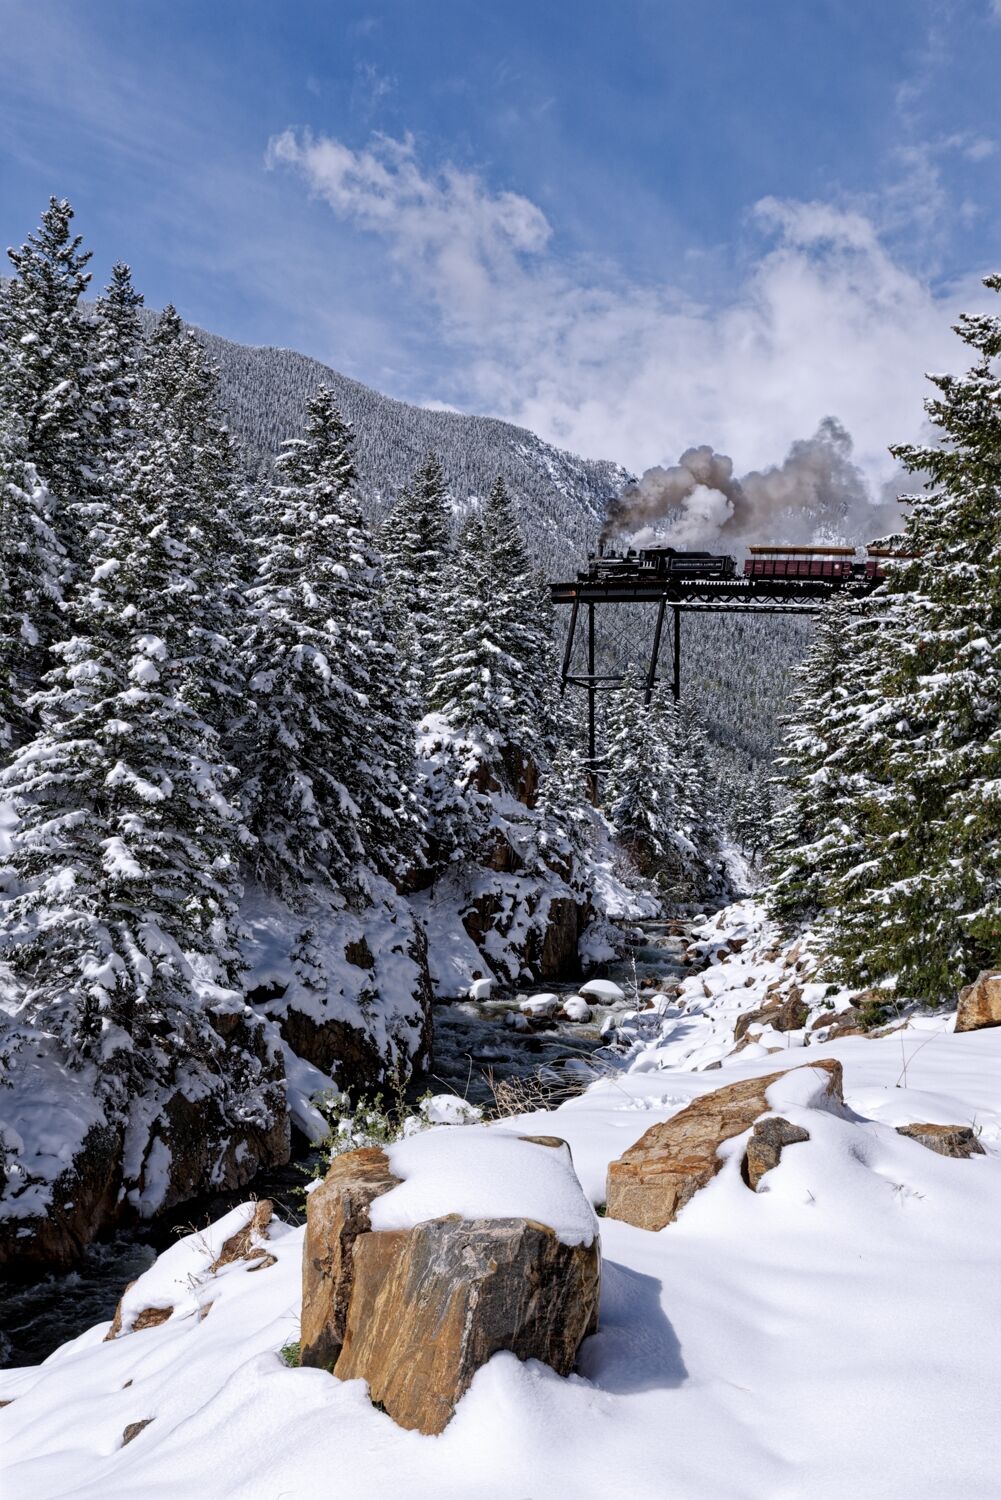 First train out headed to Silver Plume Colorado crossing Devils Gate Bridge. A heavy wet spring snow overnight a week before...